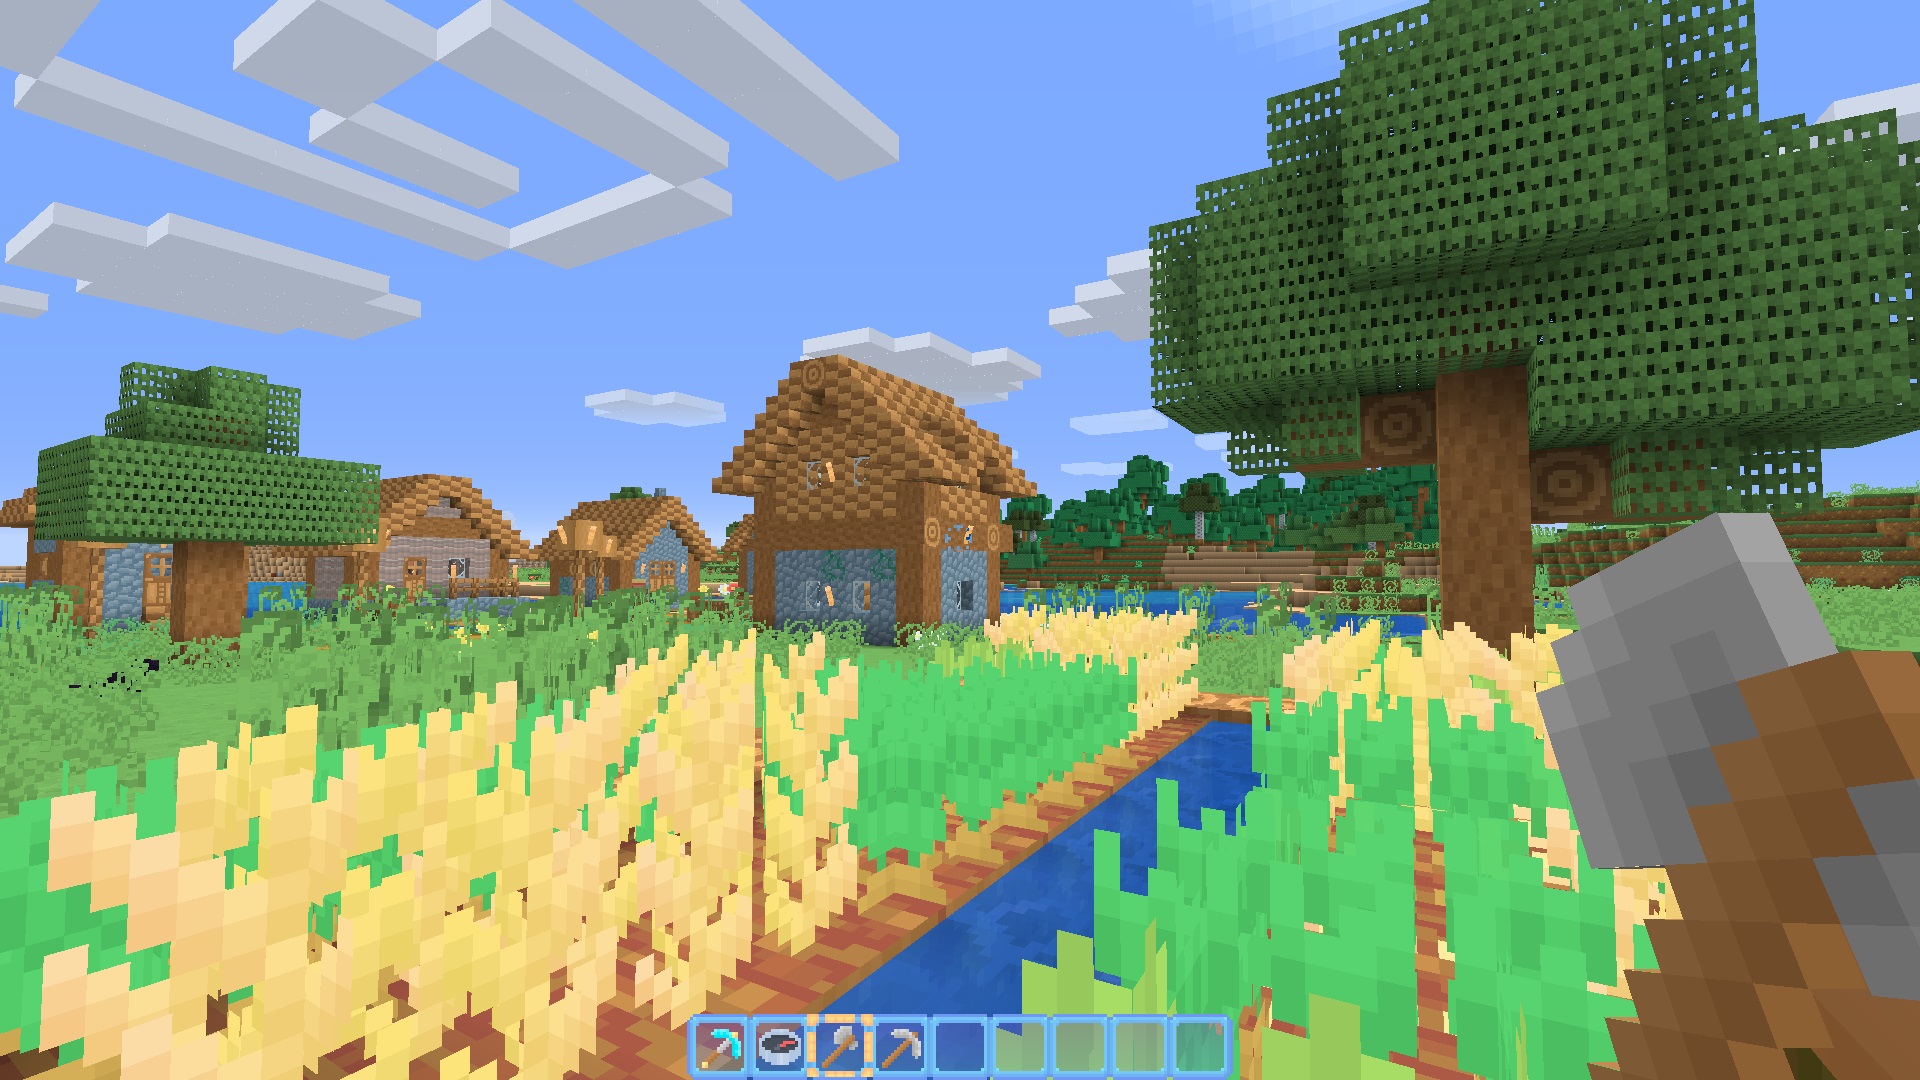 Minecraft texture pack - Pastelcraft - A field of crops, pastel yellow wheat and pastel green carrot leaves